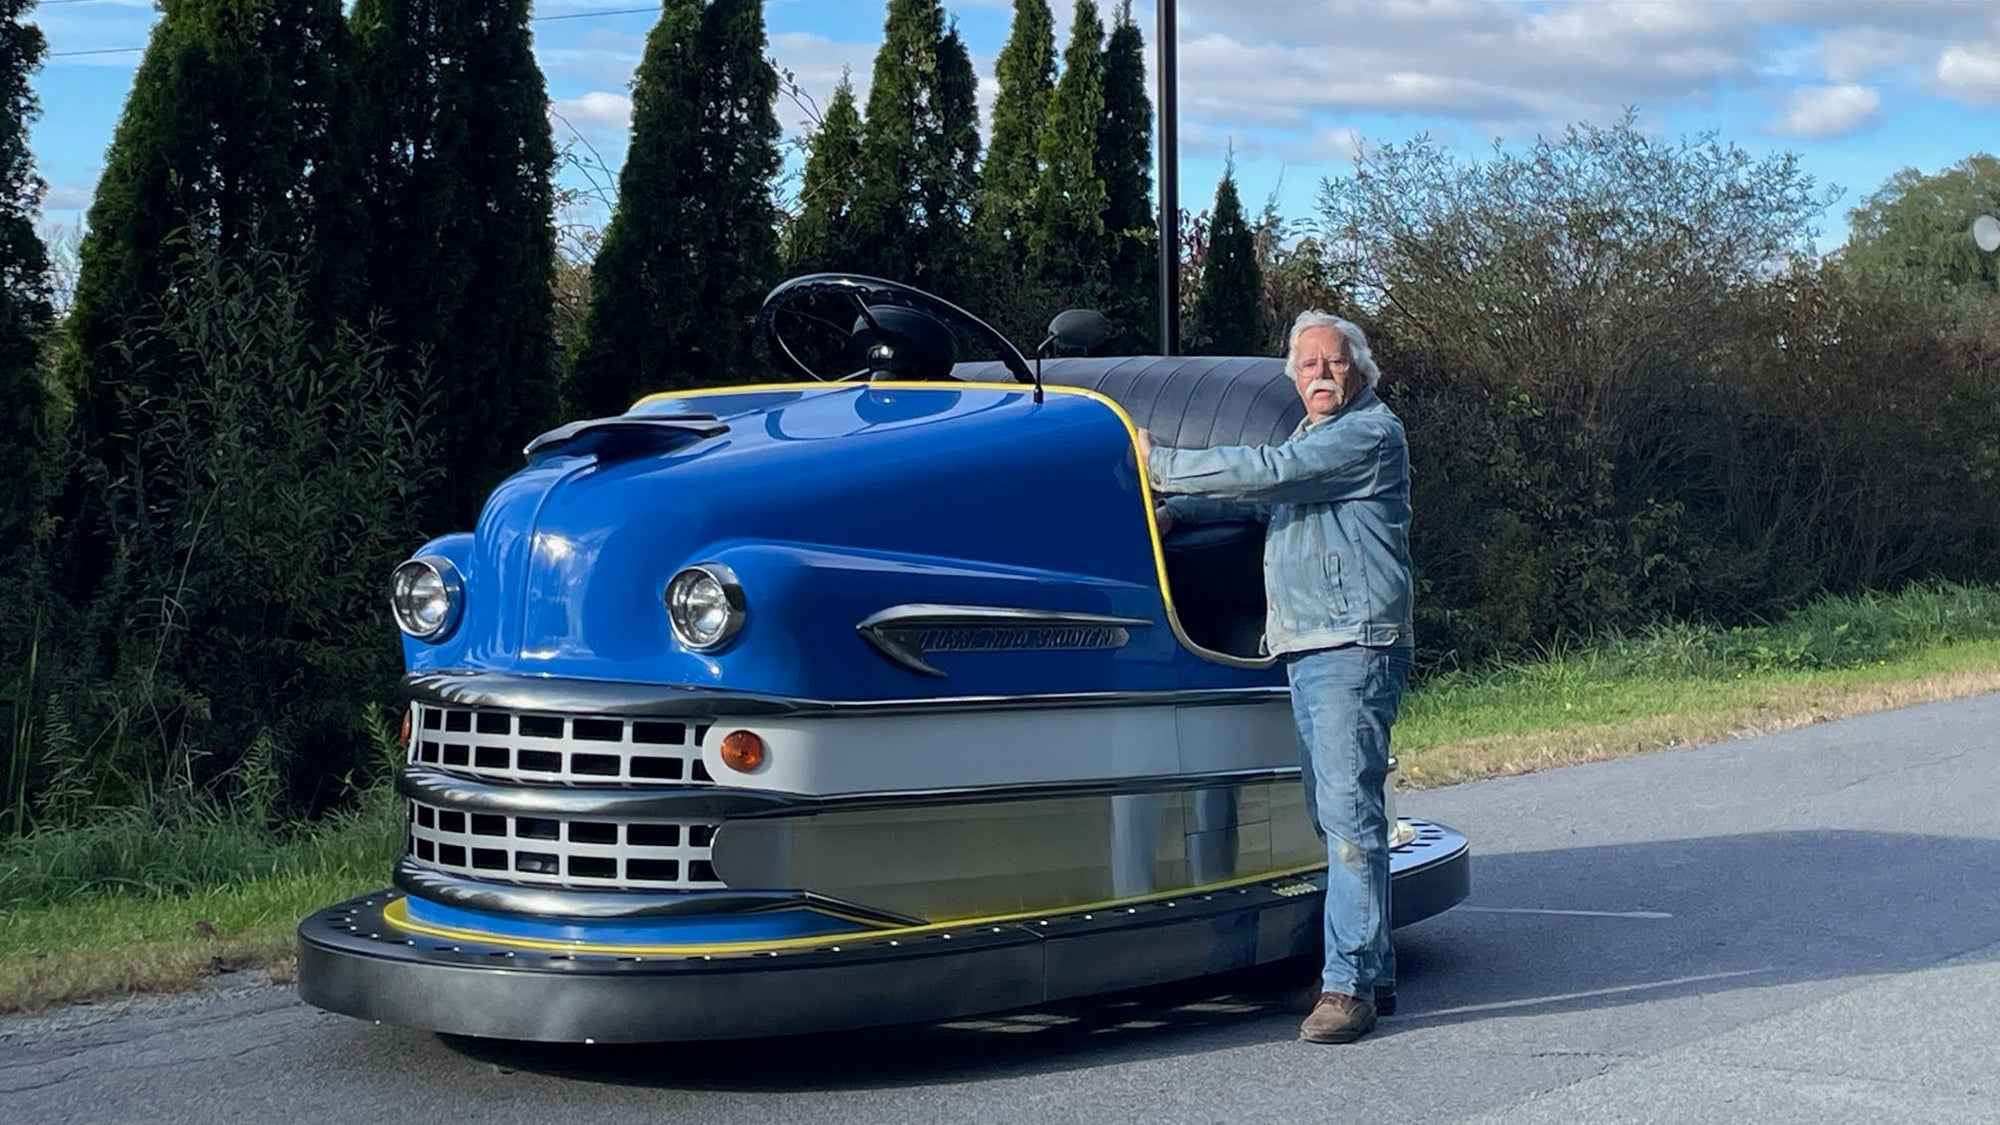 This giant bumper car is a delightful, street-legal machine